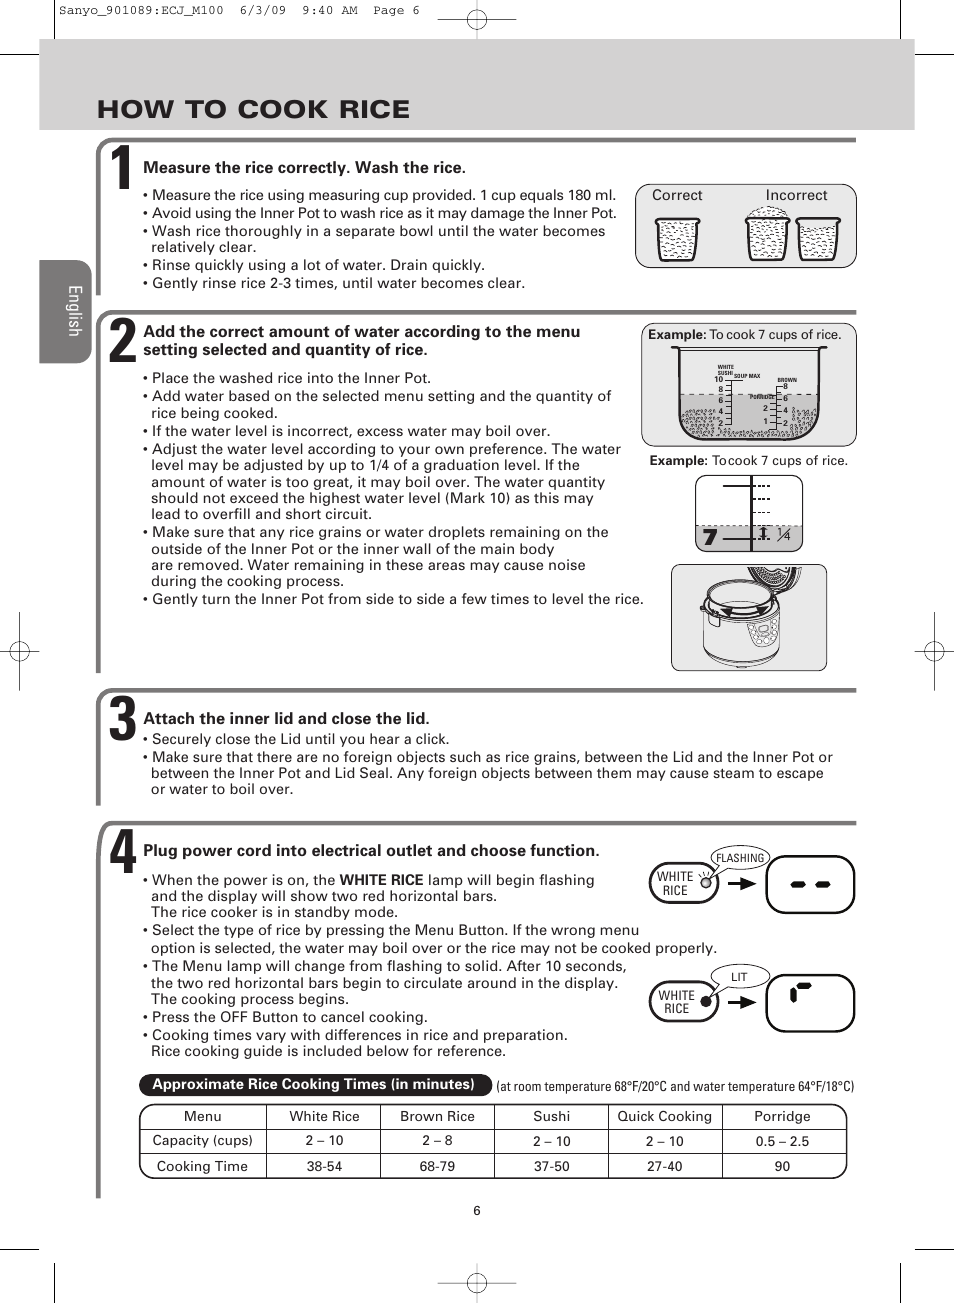 How to cook rice | Sanyo RICE COOKER & VERSATILE COOKER ECJ-M100S User  Manual | Page 6 / 32 | Original mode